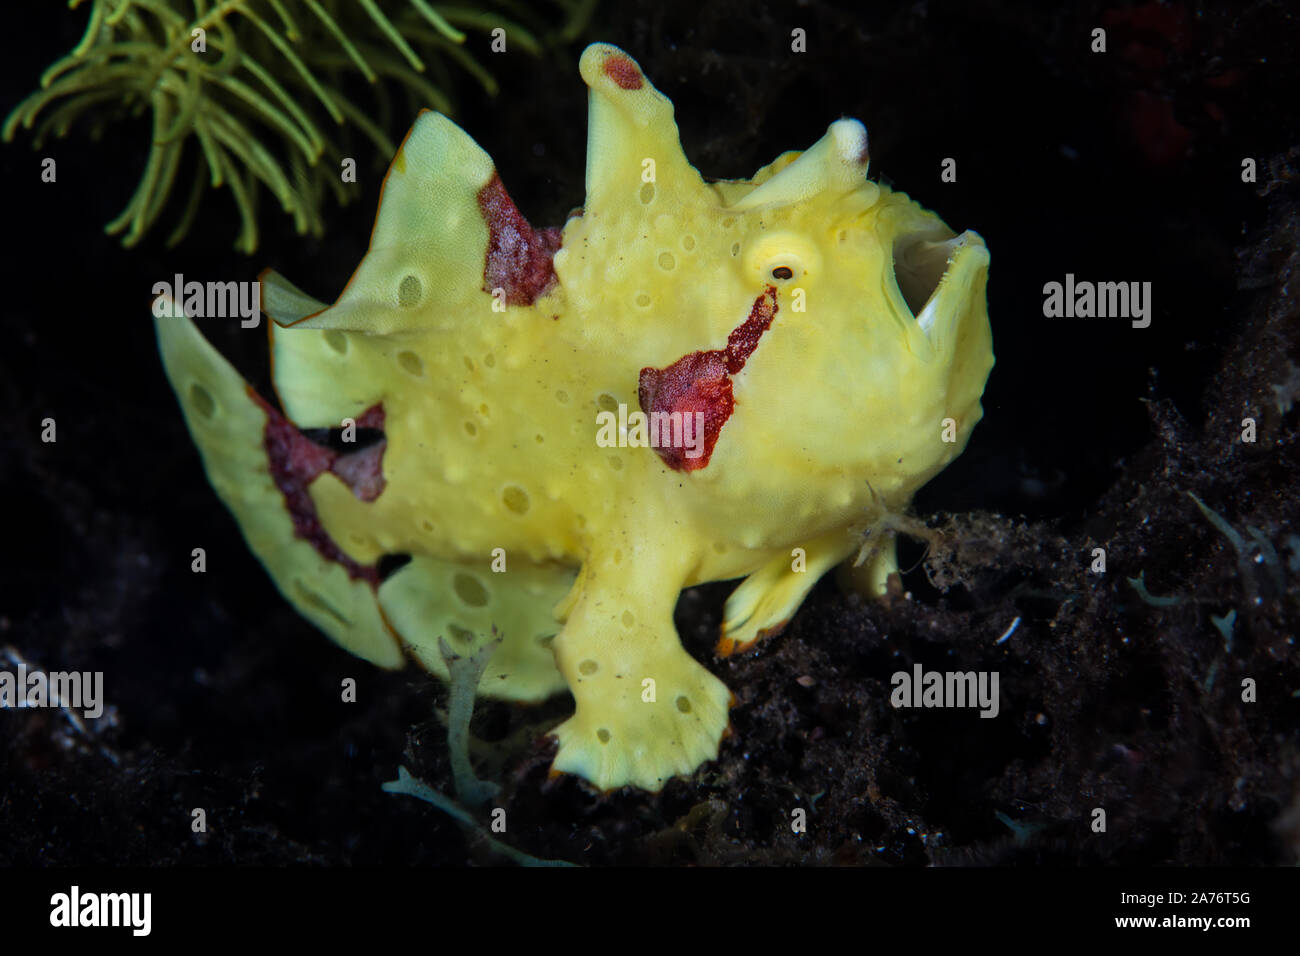 A brightly colored Warty frogfish, Antennarius maculatus, waits to ambush small prey on a black sand slope off Pulau Sangeang in Indonesia. Stock Photo